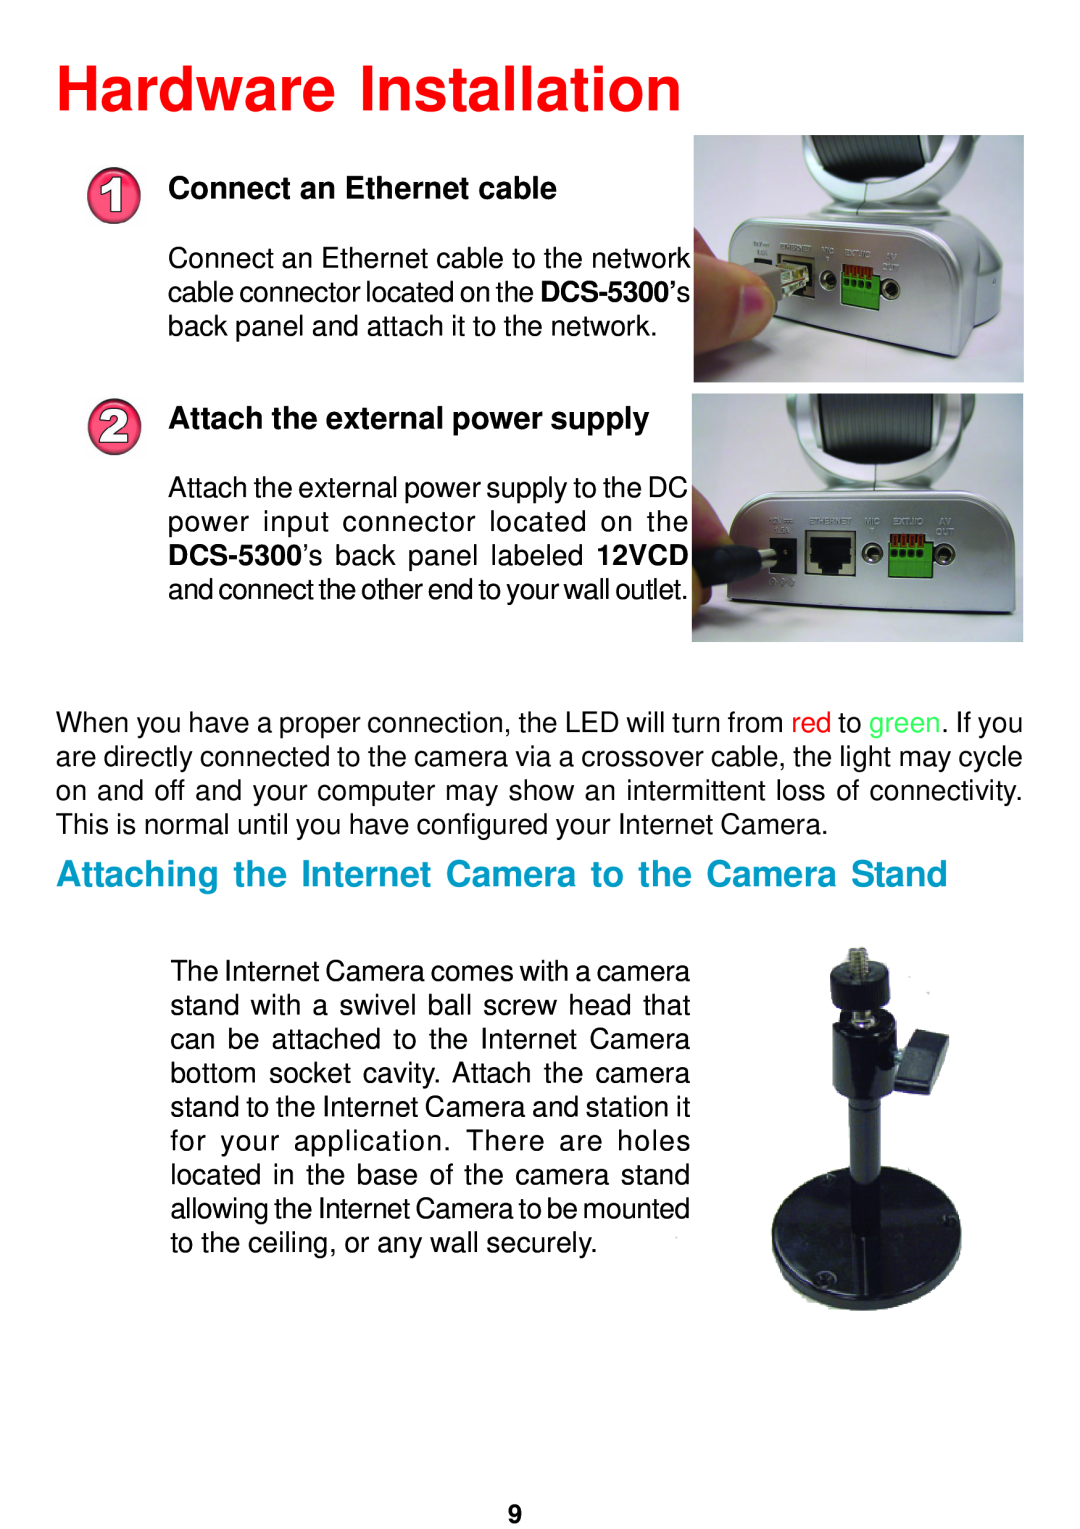 D-Link DCS-5300 manual Hardware Installation, Attaching the Internet Camera to the Camera Stand, Connect an Ethernet cable 